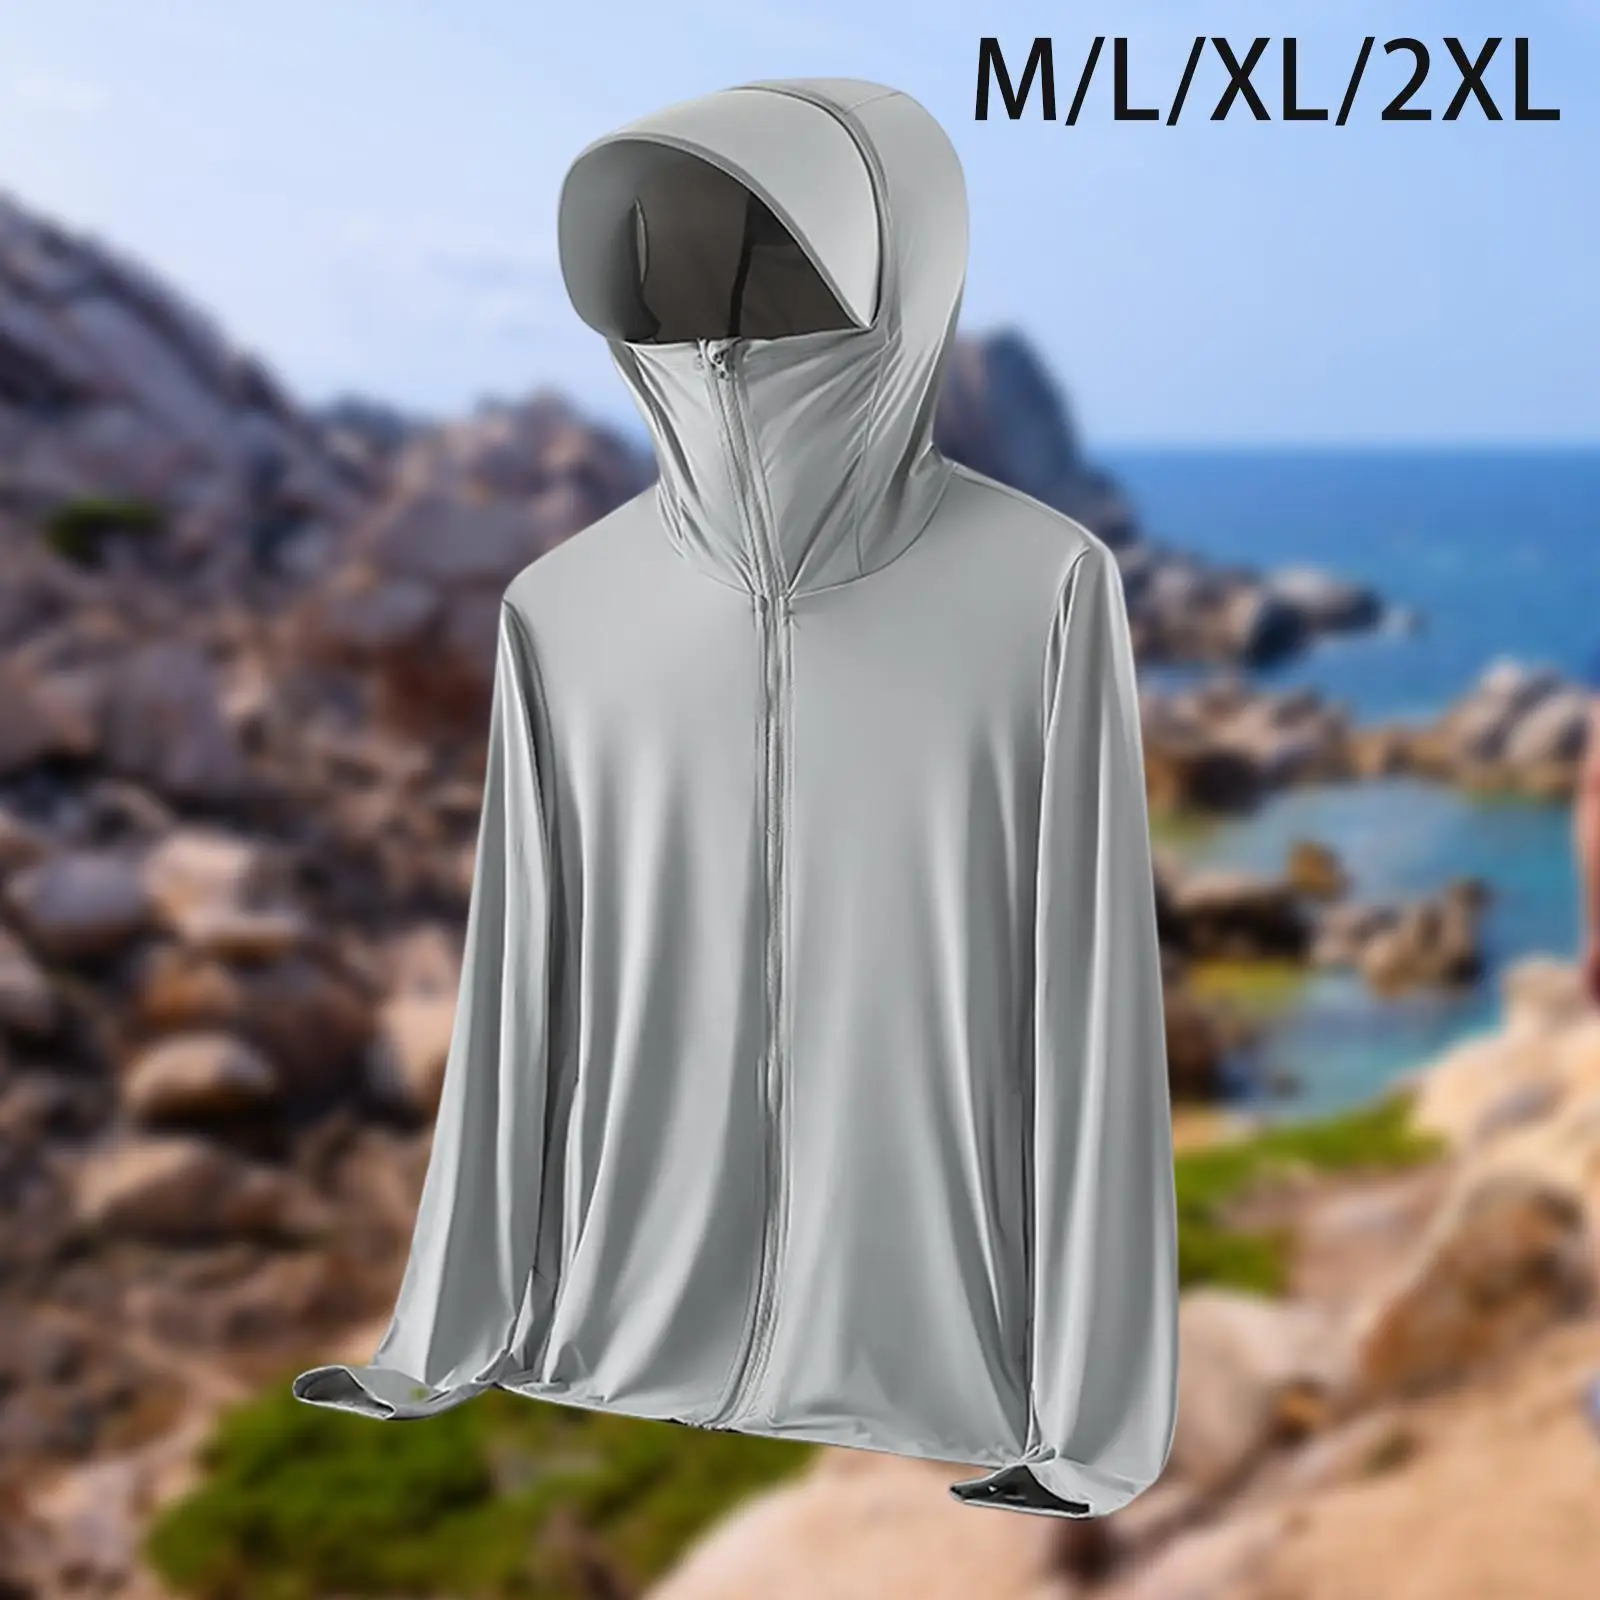 Sun Protection Jacket Sun Block Clothing Thin Breathable Long Sleeve Cooling Shirt Coat for Running Hiking Summer Cycling